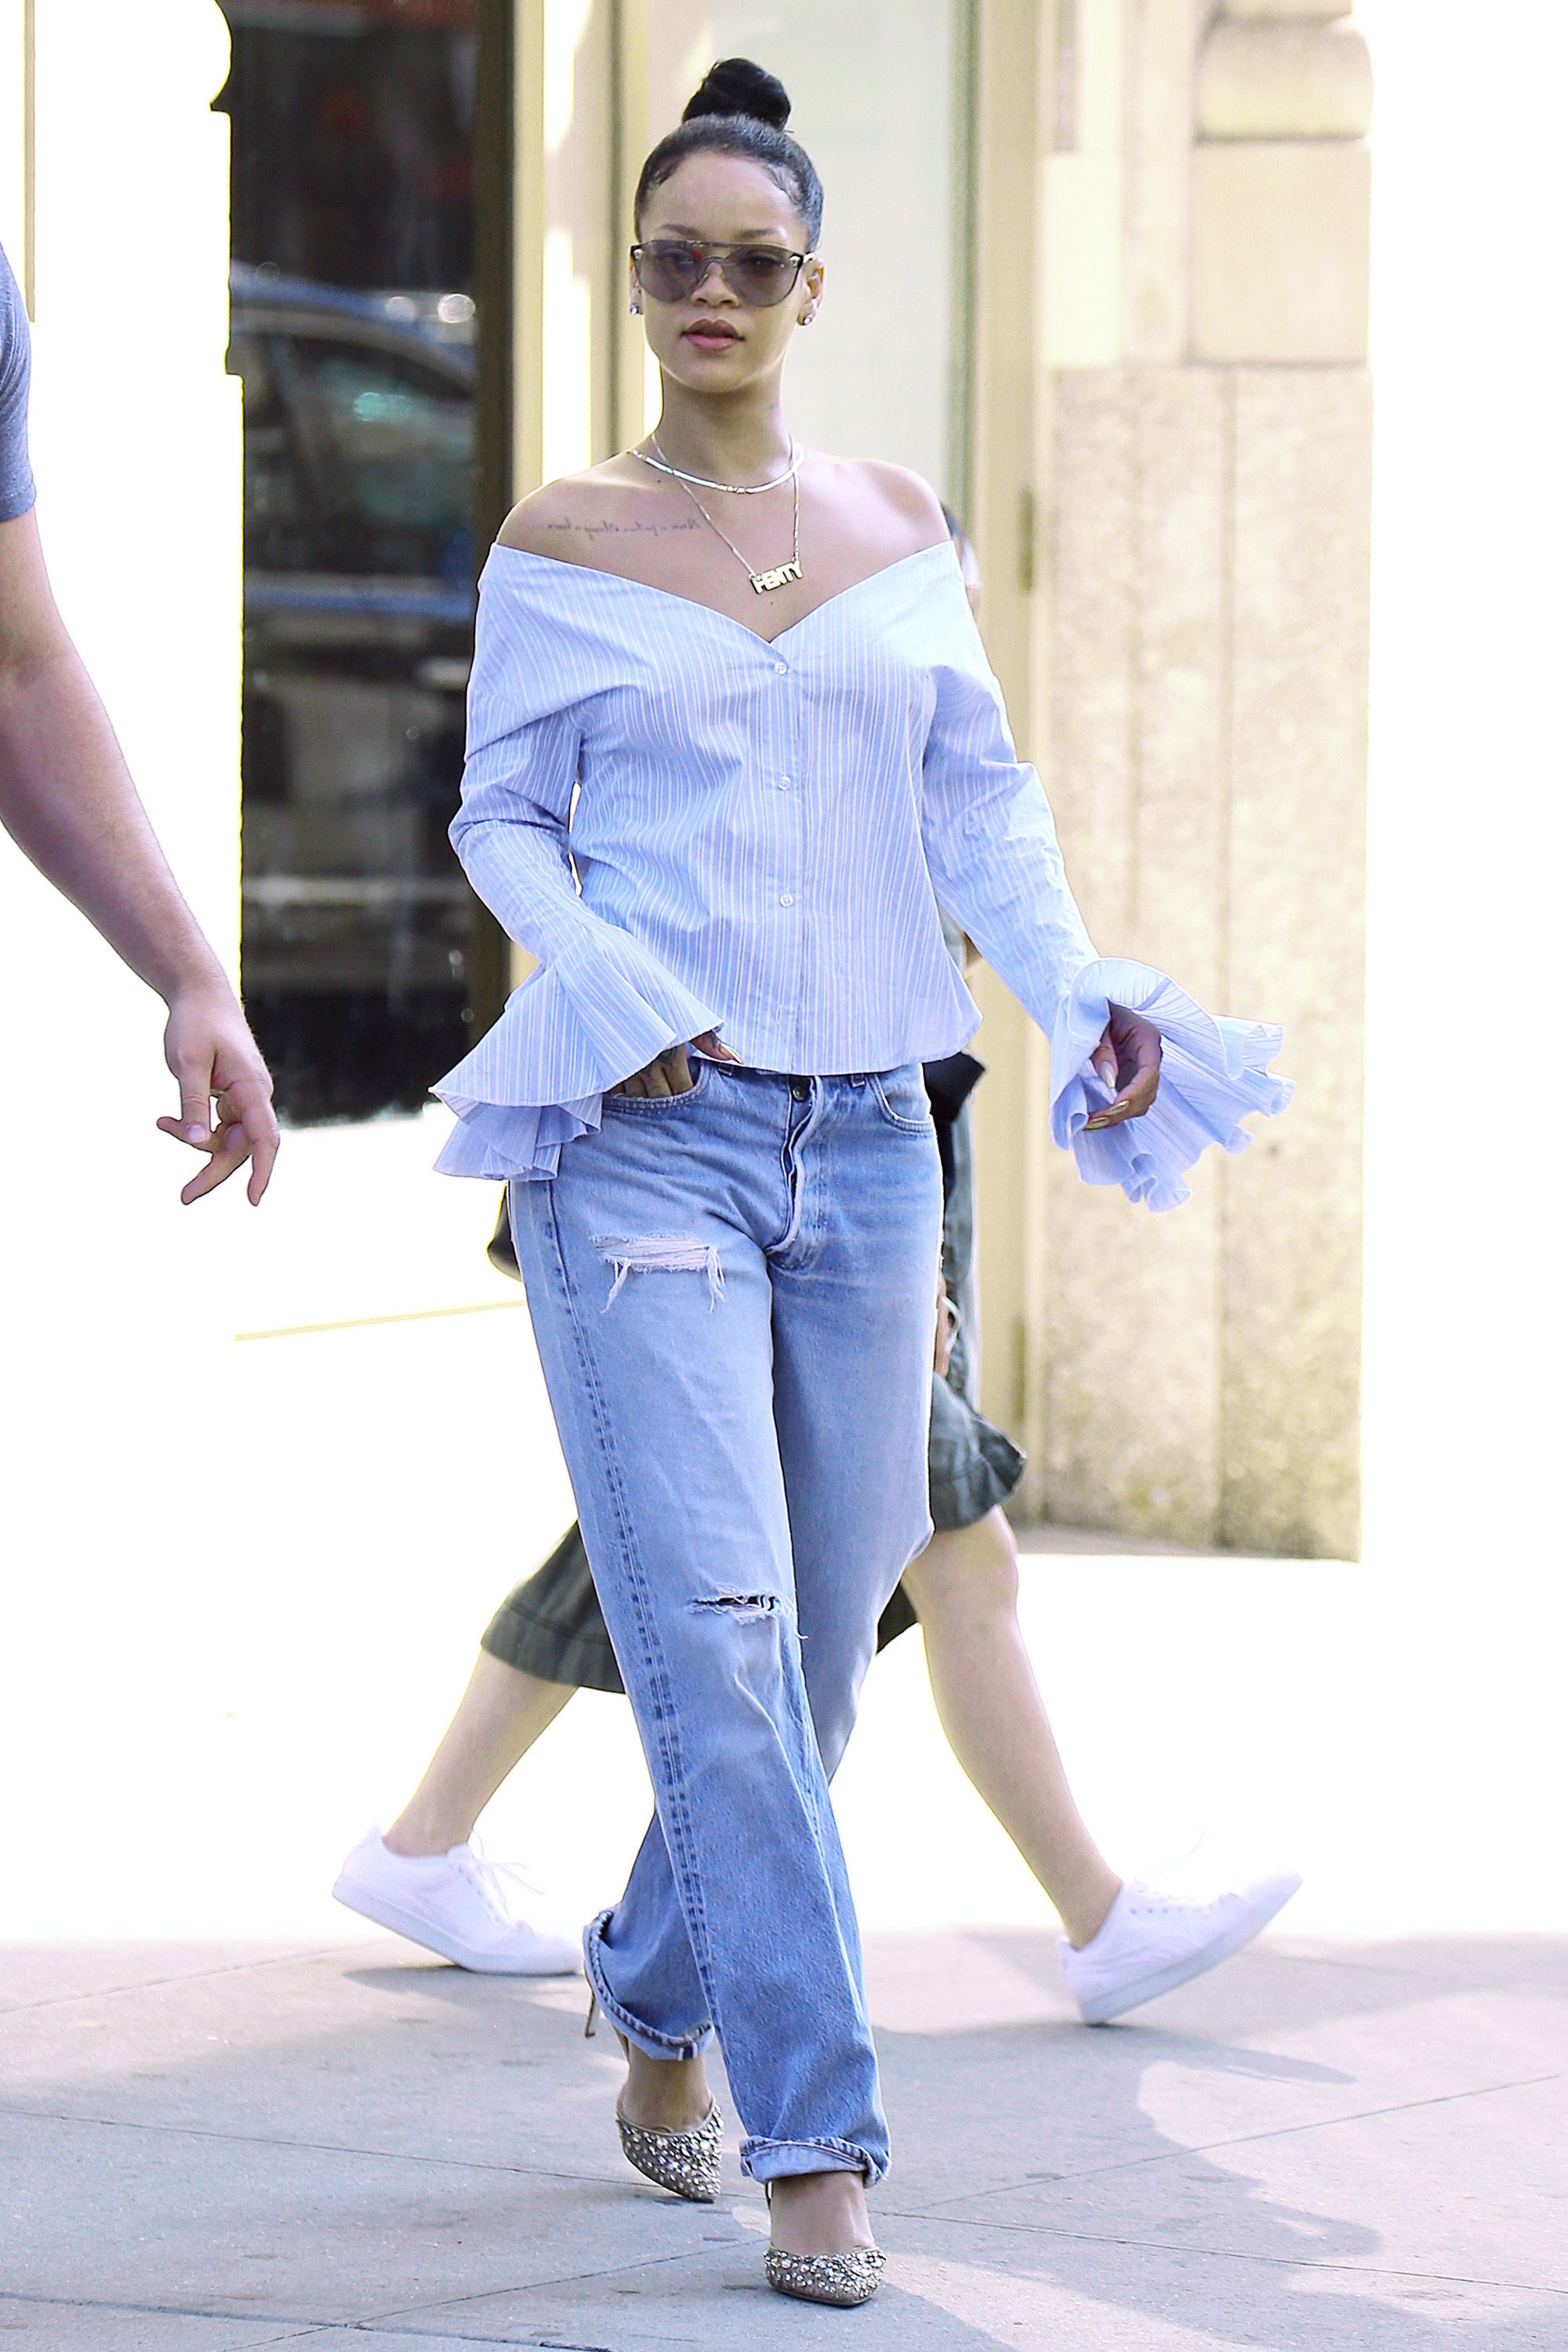 Denim: What Jeans To Wear This Summer